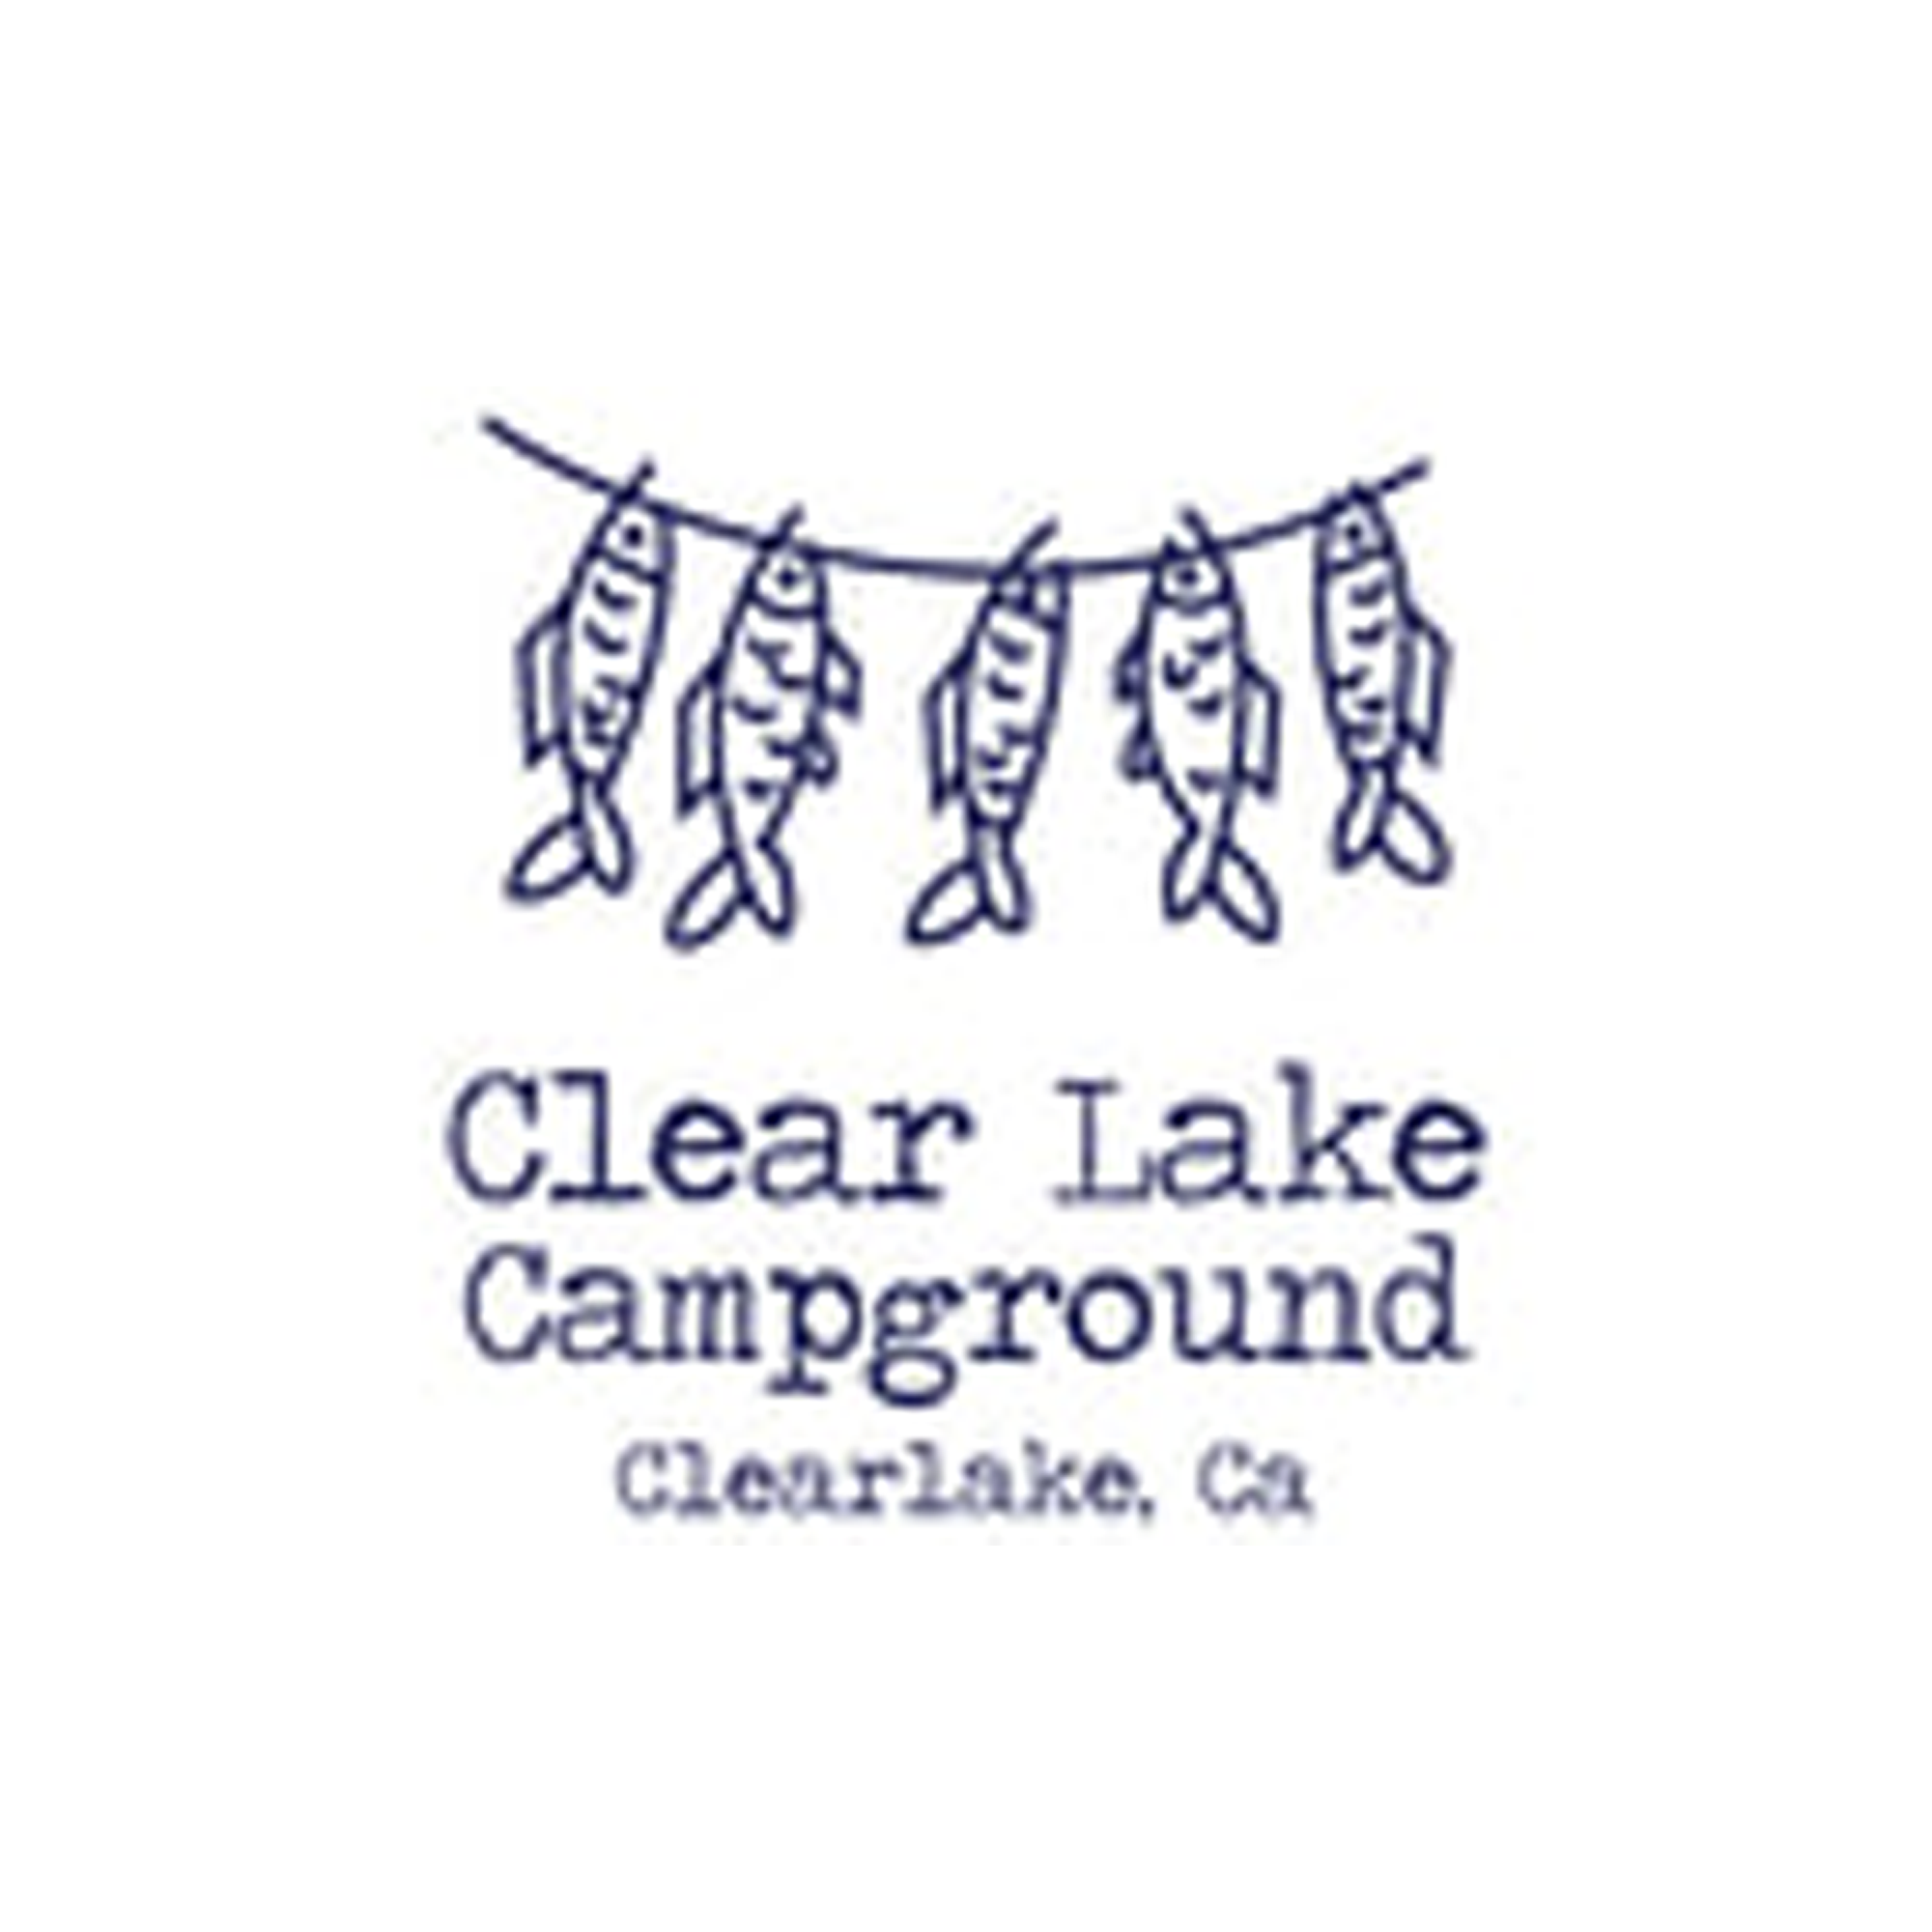 2019 Sponsor Clearlake Campground.png